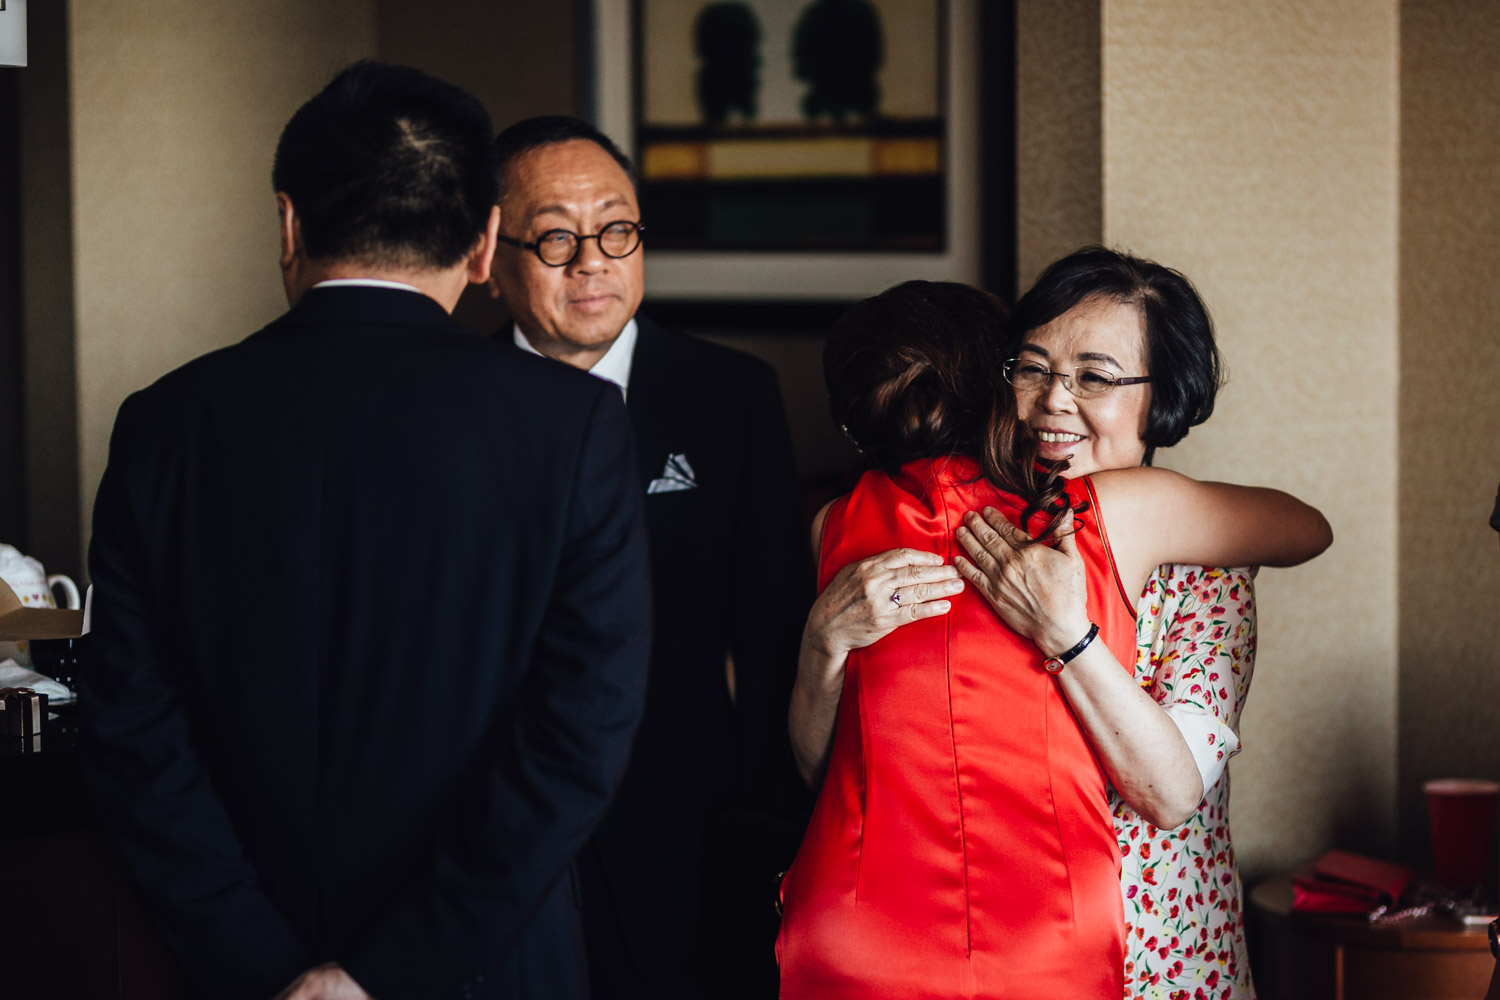 richmond wedding photography at river rock hotel marriage signing